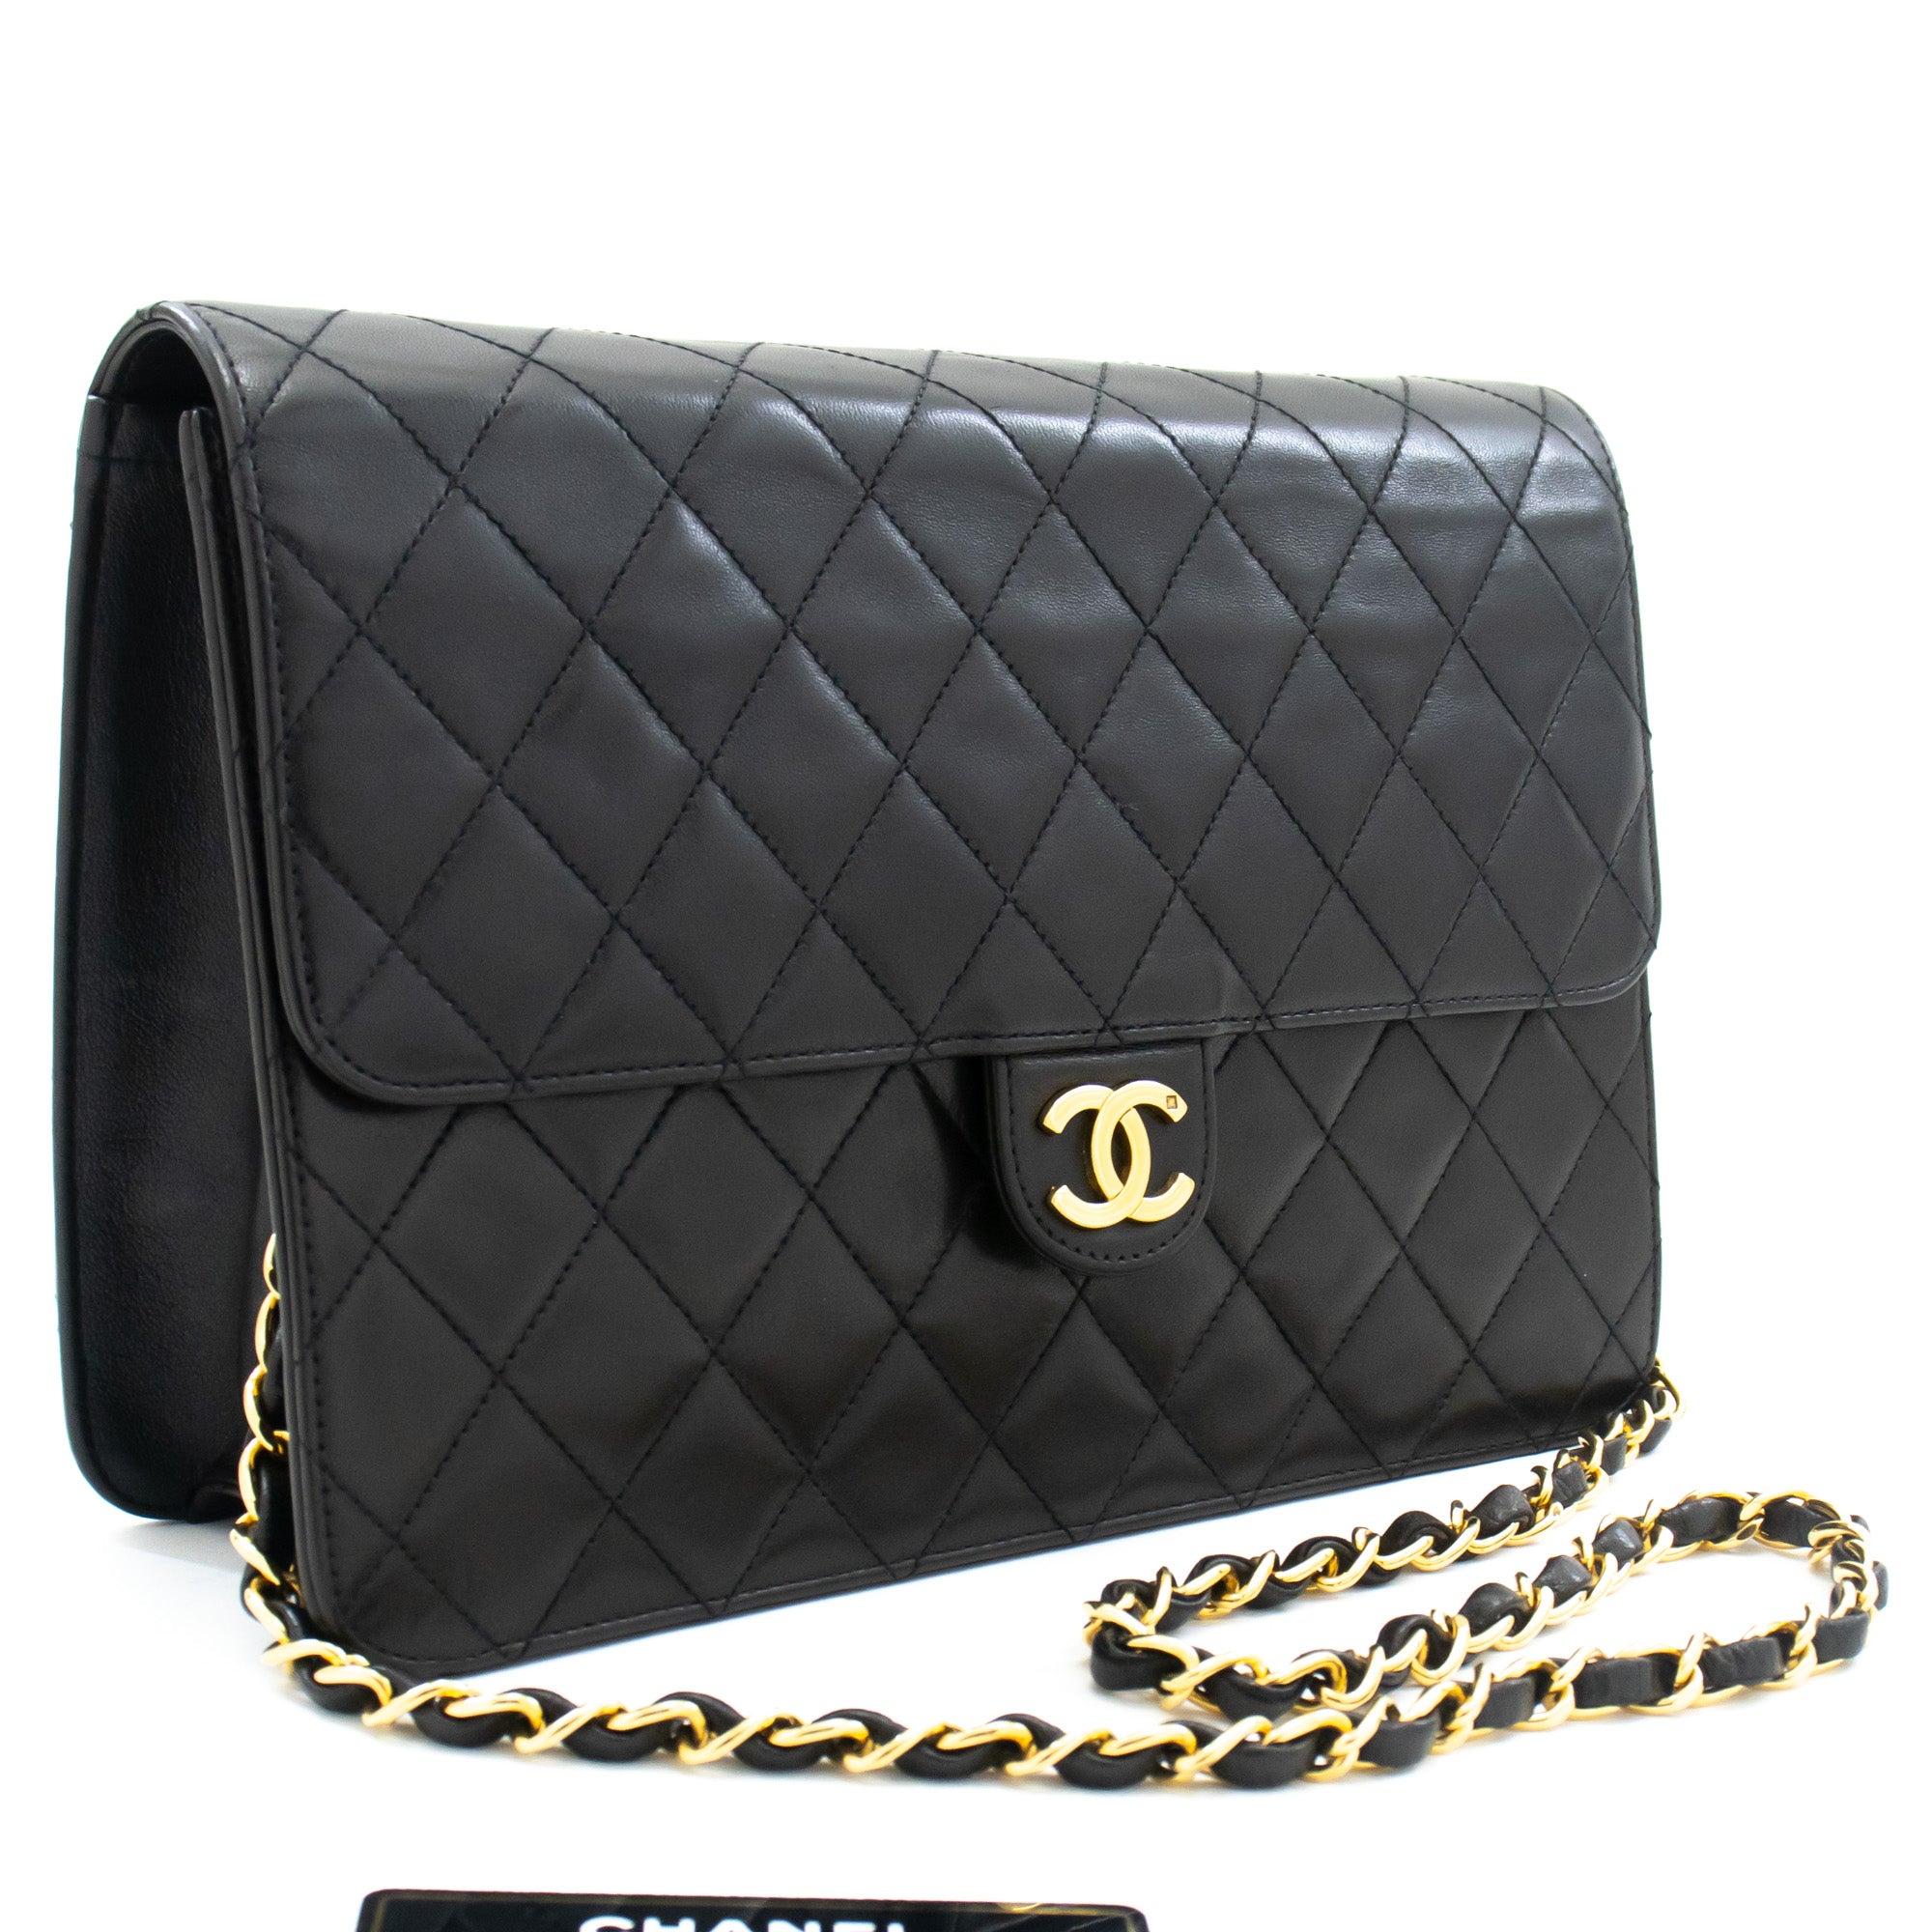 chanel brown leather bag